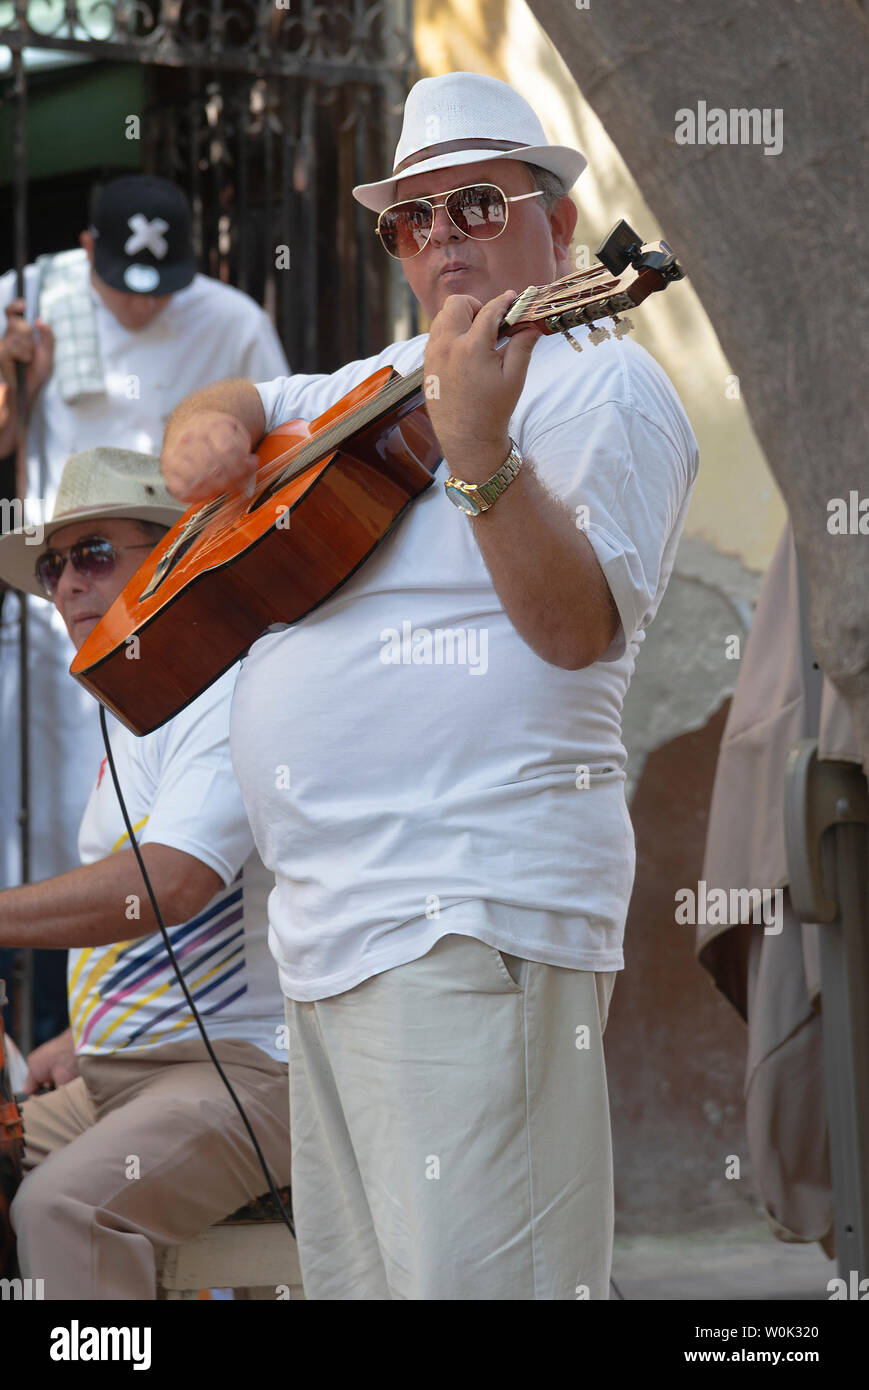 Guitarist, part of a band, plays music in a street in the Old Town, or Havana Vieja,   Havana, Cuba, Caribbean Stock Photo